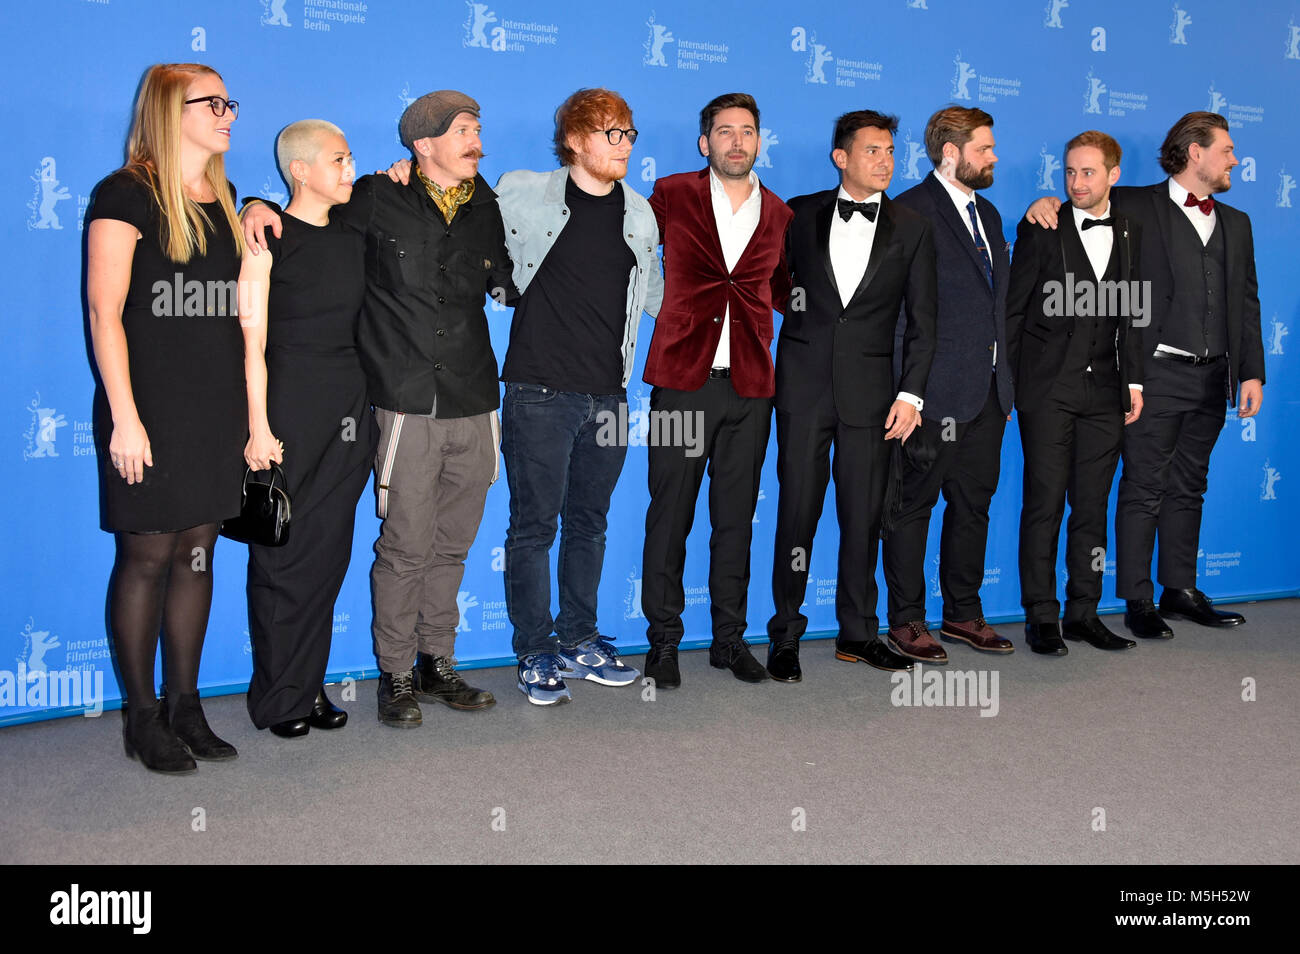 Maleri Sevier, Kimmie Kim, Foy Vance, Ed Sheeran, Murray Cummings, Alejandro Reyes-Knight, Ben Wainwright-Pearce, Billy Cummings and William Bean during the 'Songwriter' photocall at the 68th Berlin International Film Festival / Berlinale 2018 on February 23, 2018 in Berlin, Germany. Stock Photo